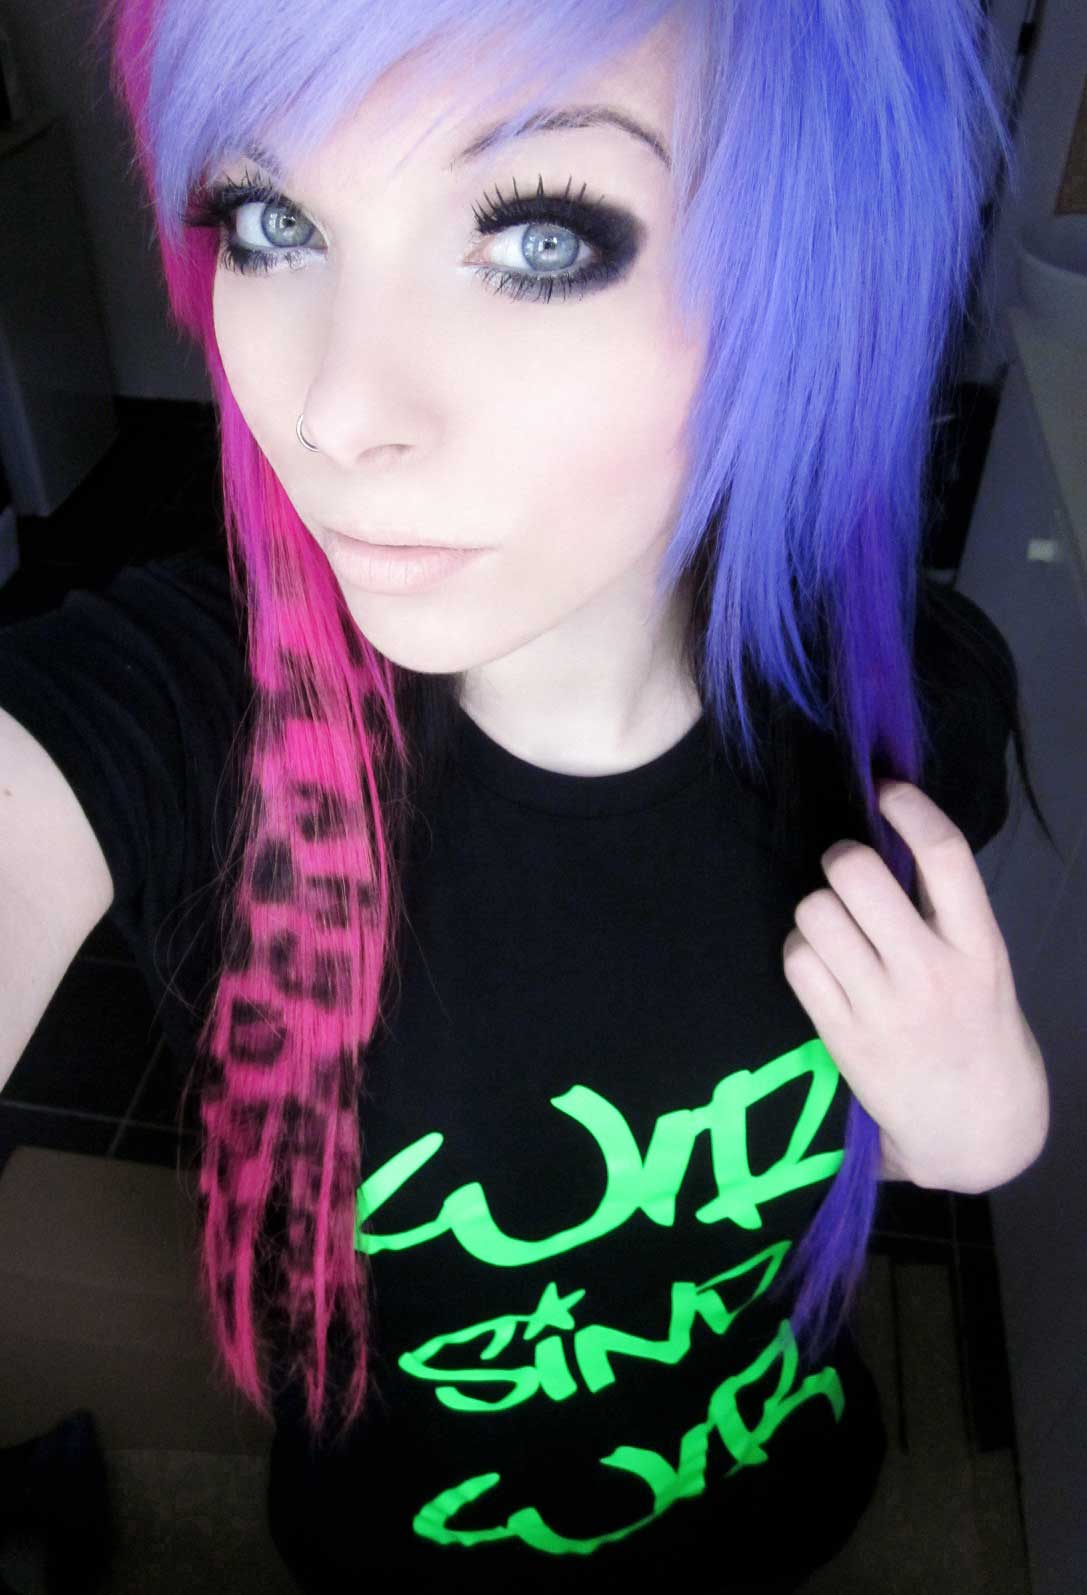 Emo Hairstyles For Girls - Get an Edgy Hairstyle to Stand ...